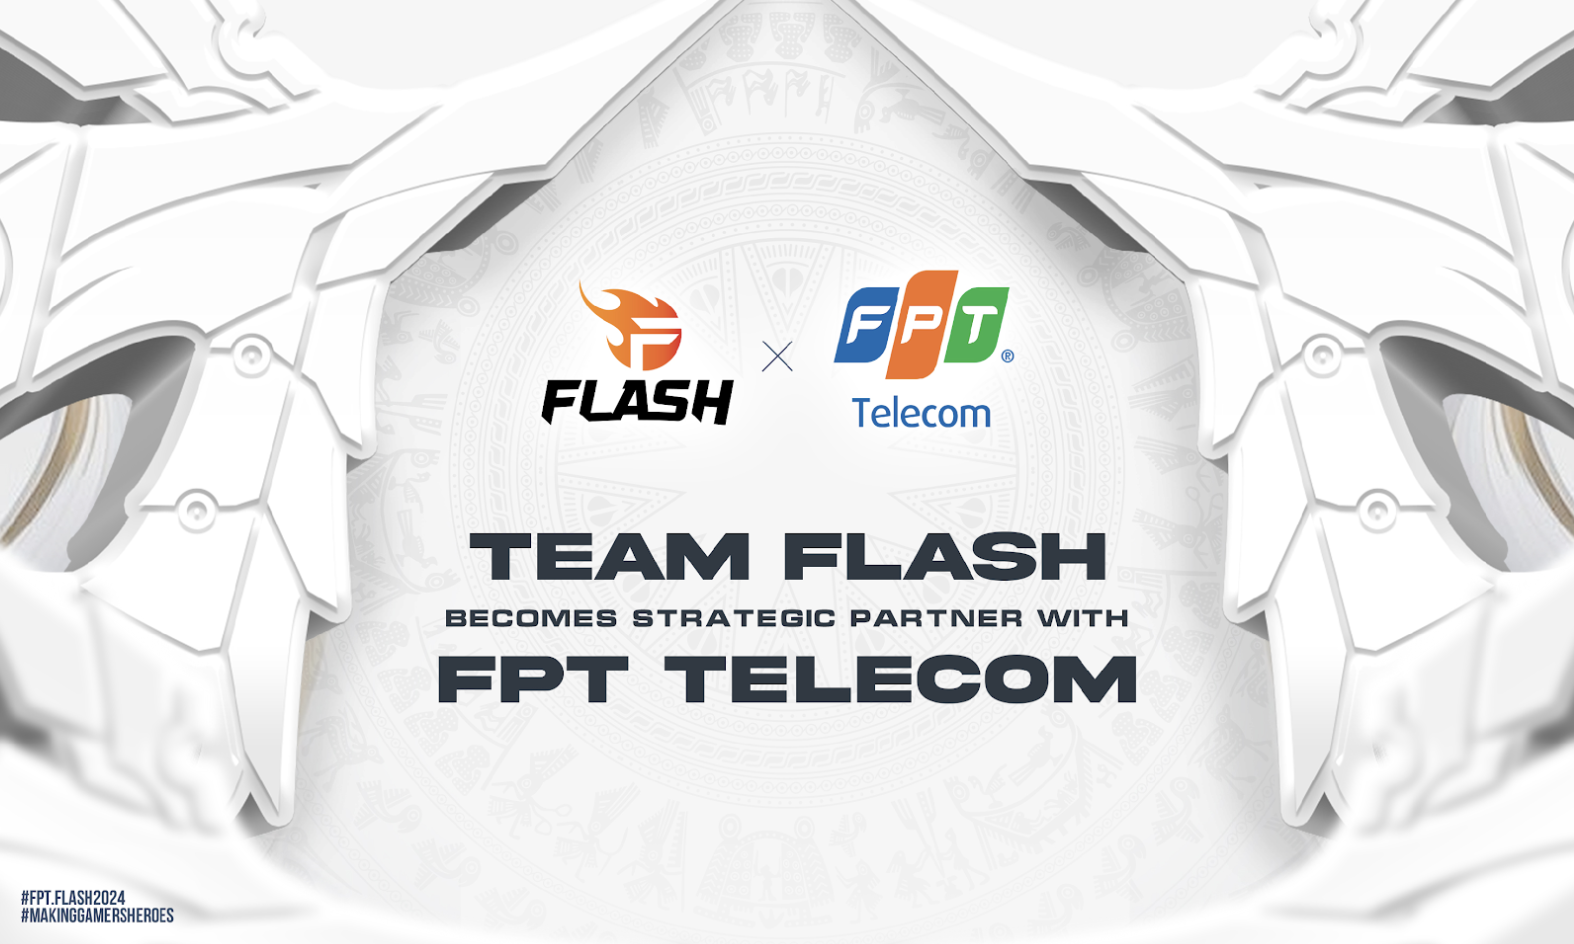 Team Flash partners with FPT Telecom